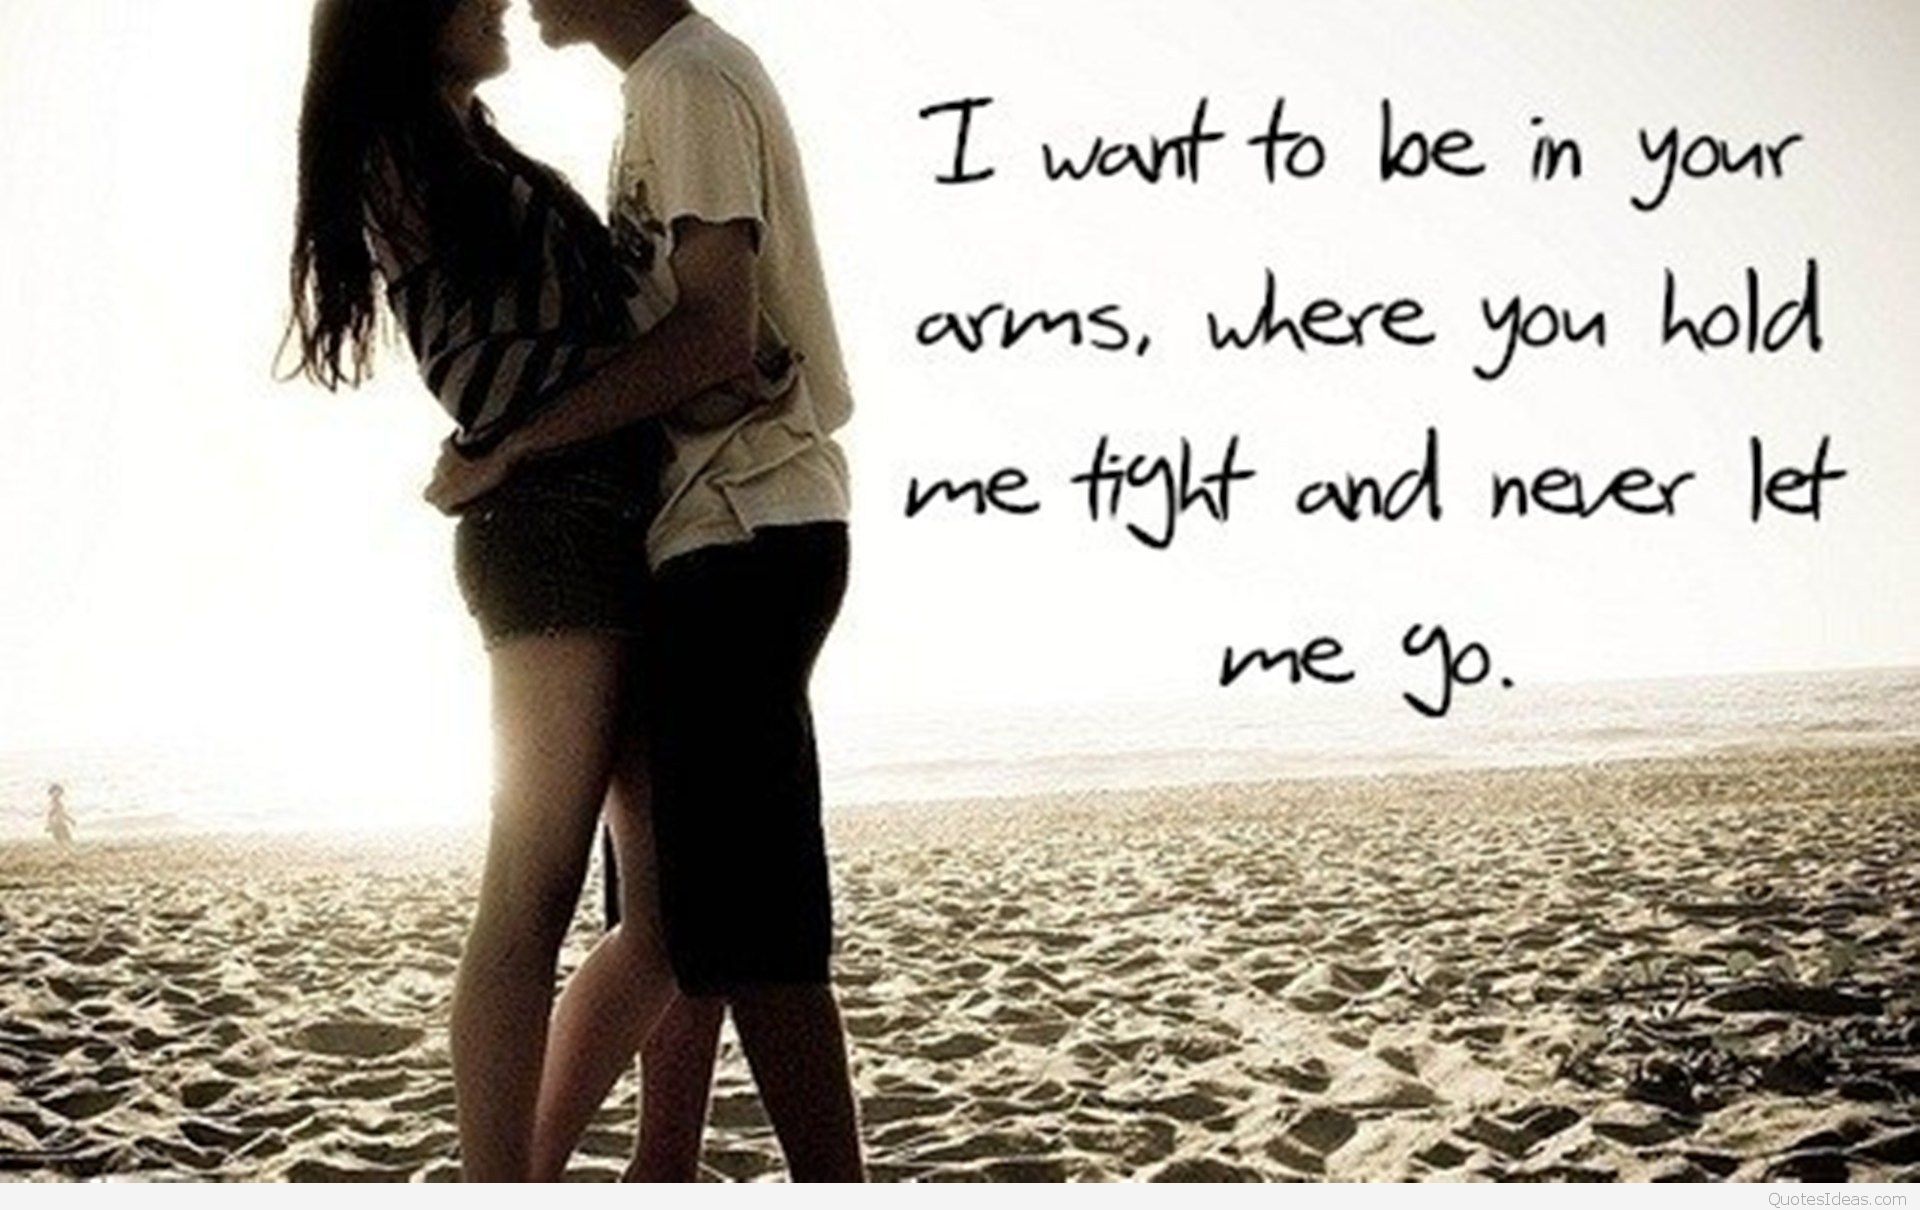 I want to be in your arms, where you hold me tight and never let go.